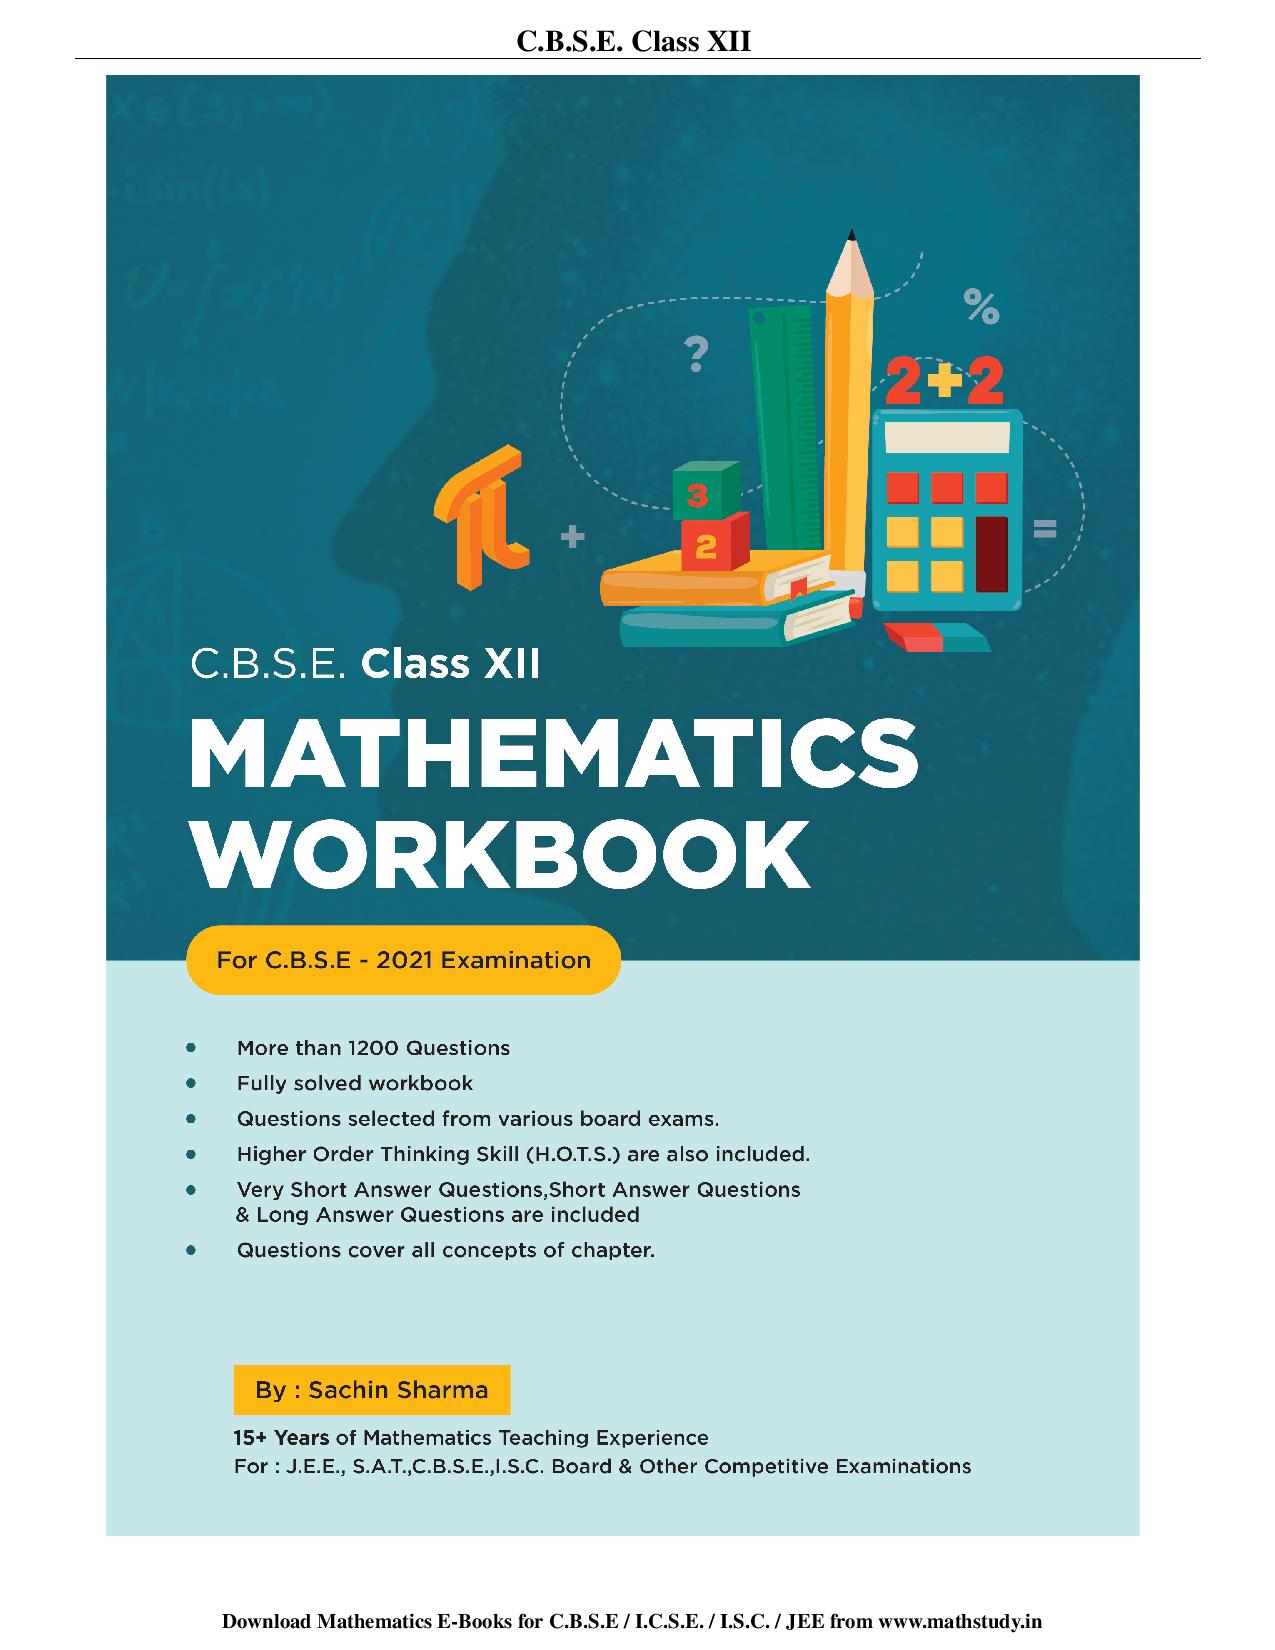 You are currently viewing mathematics workbook